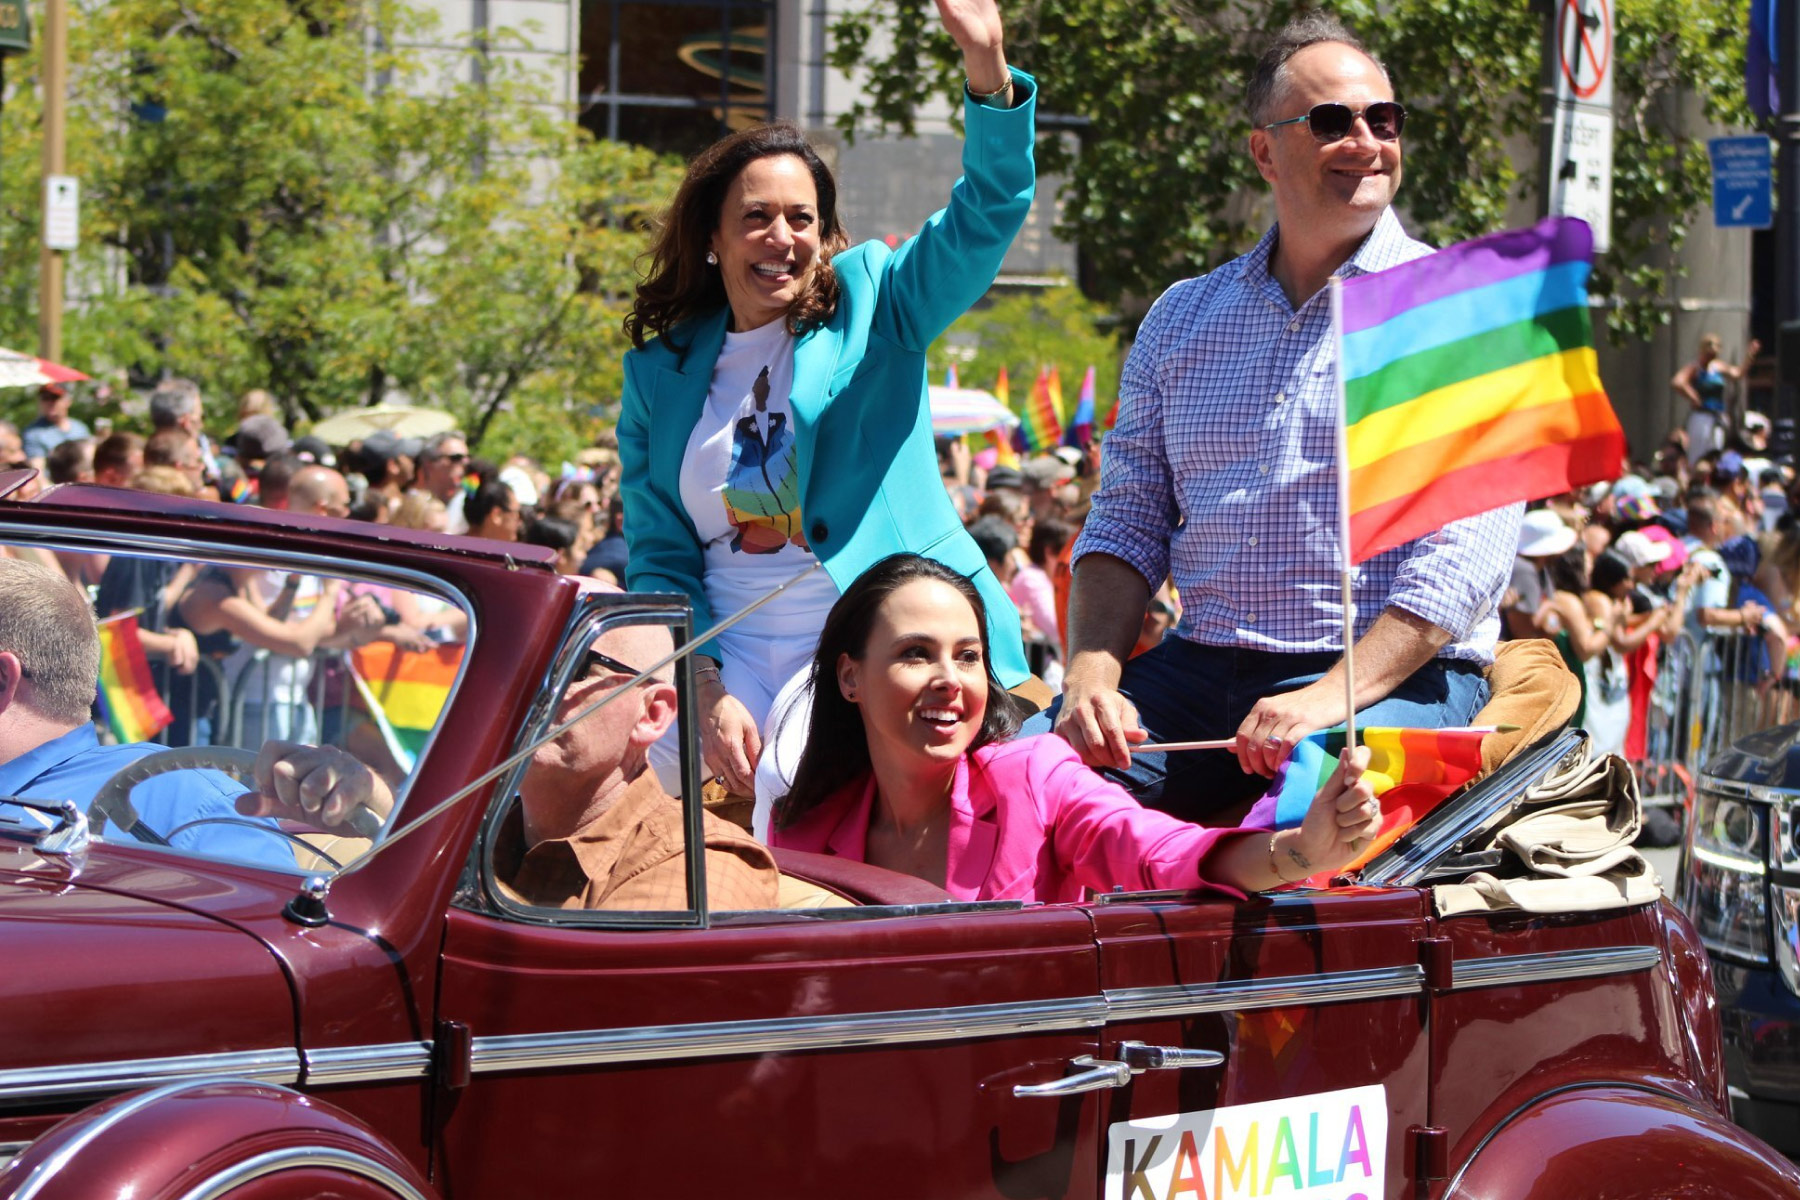 Vice President Harris smiles at a crowd at the Pride Parade in San Francisco, CA, accompanied with her husband, Doug, and her niece, Meena